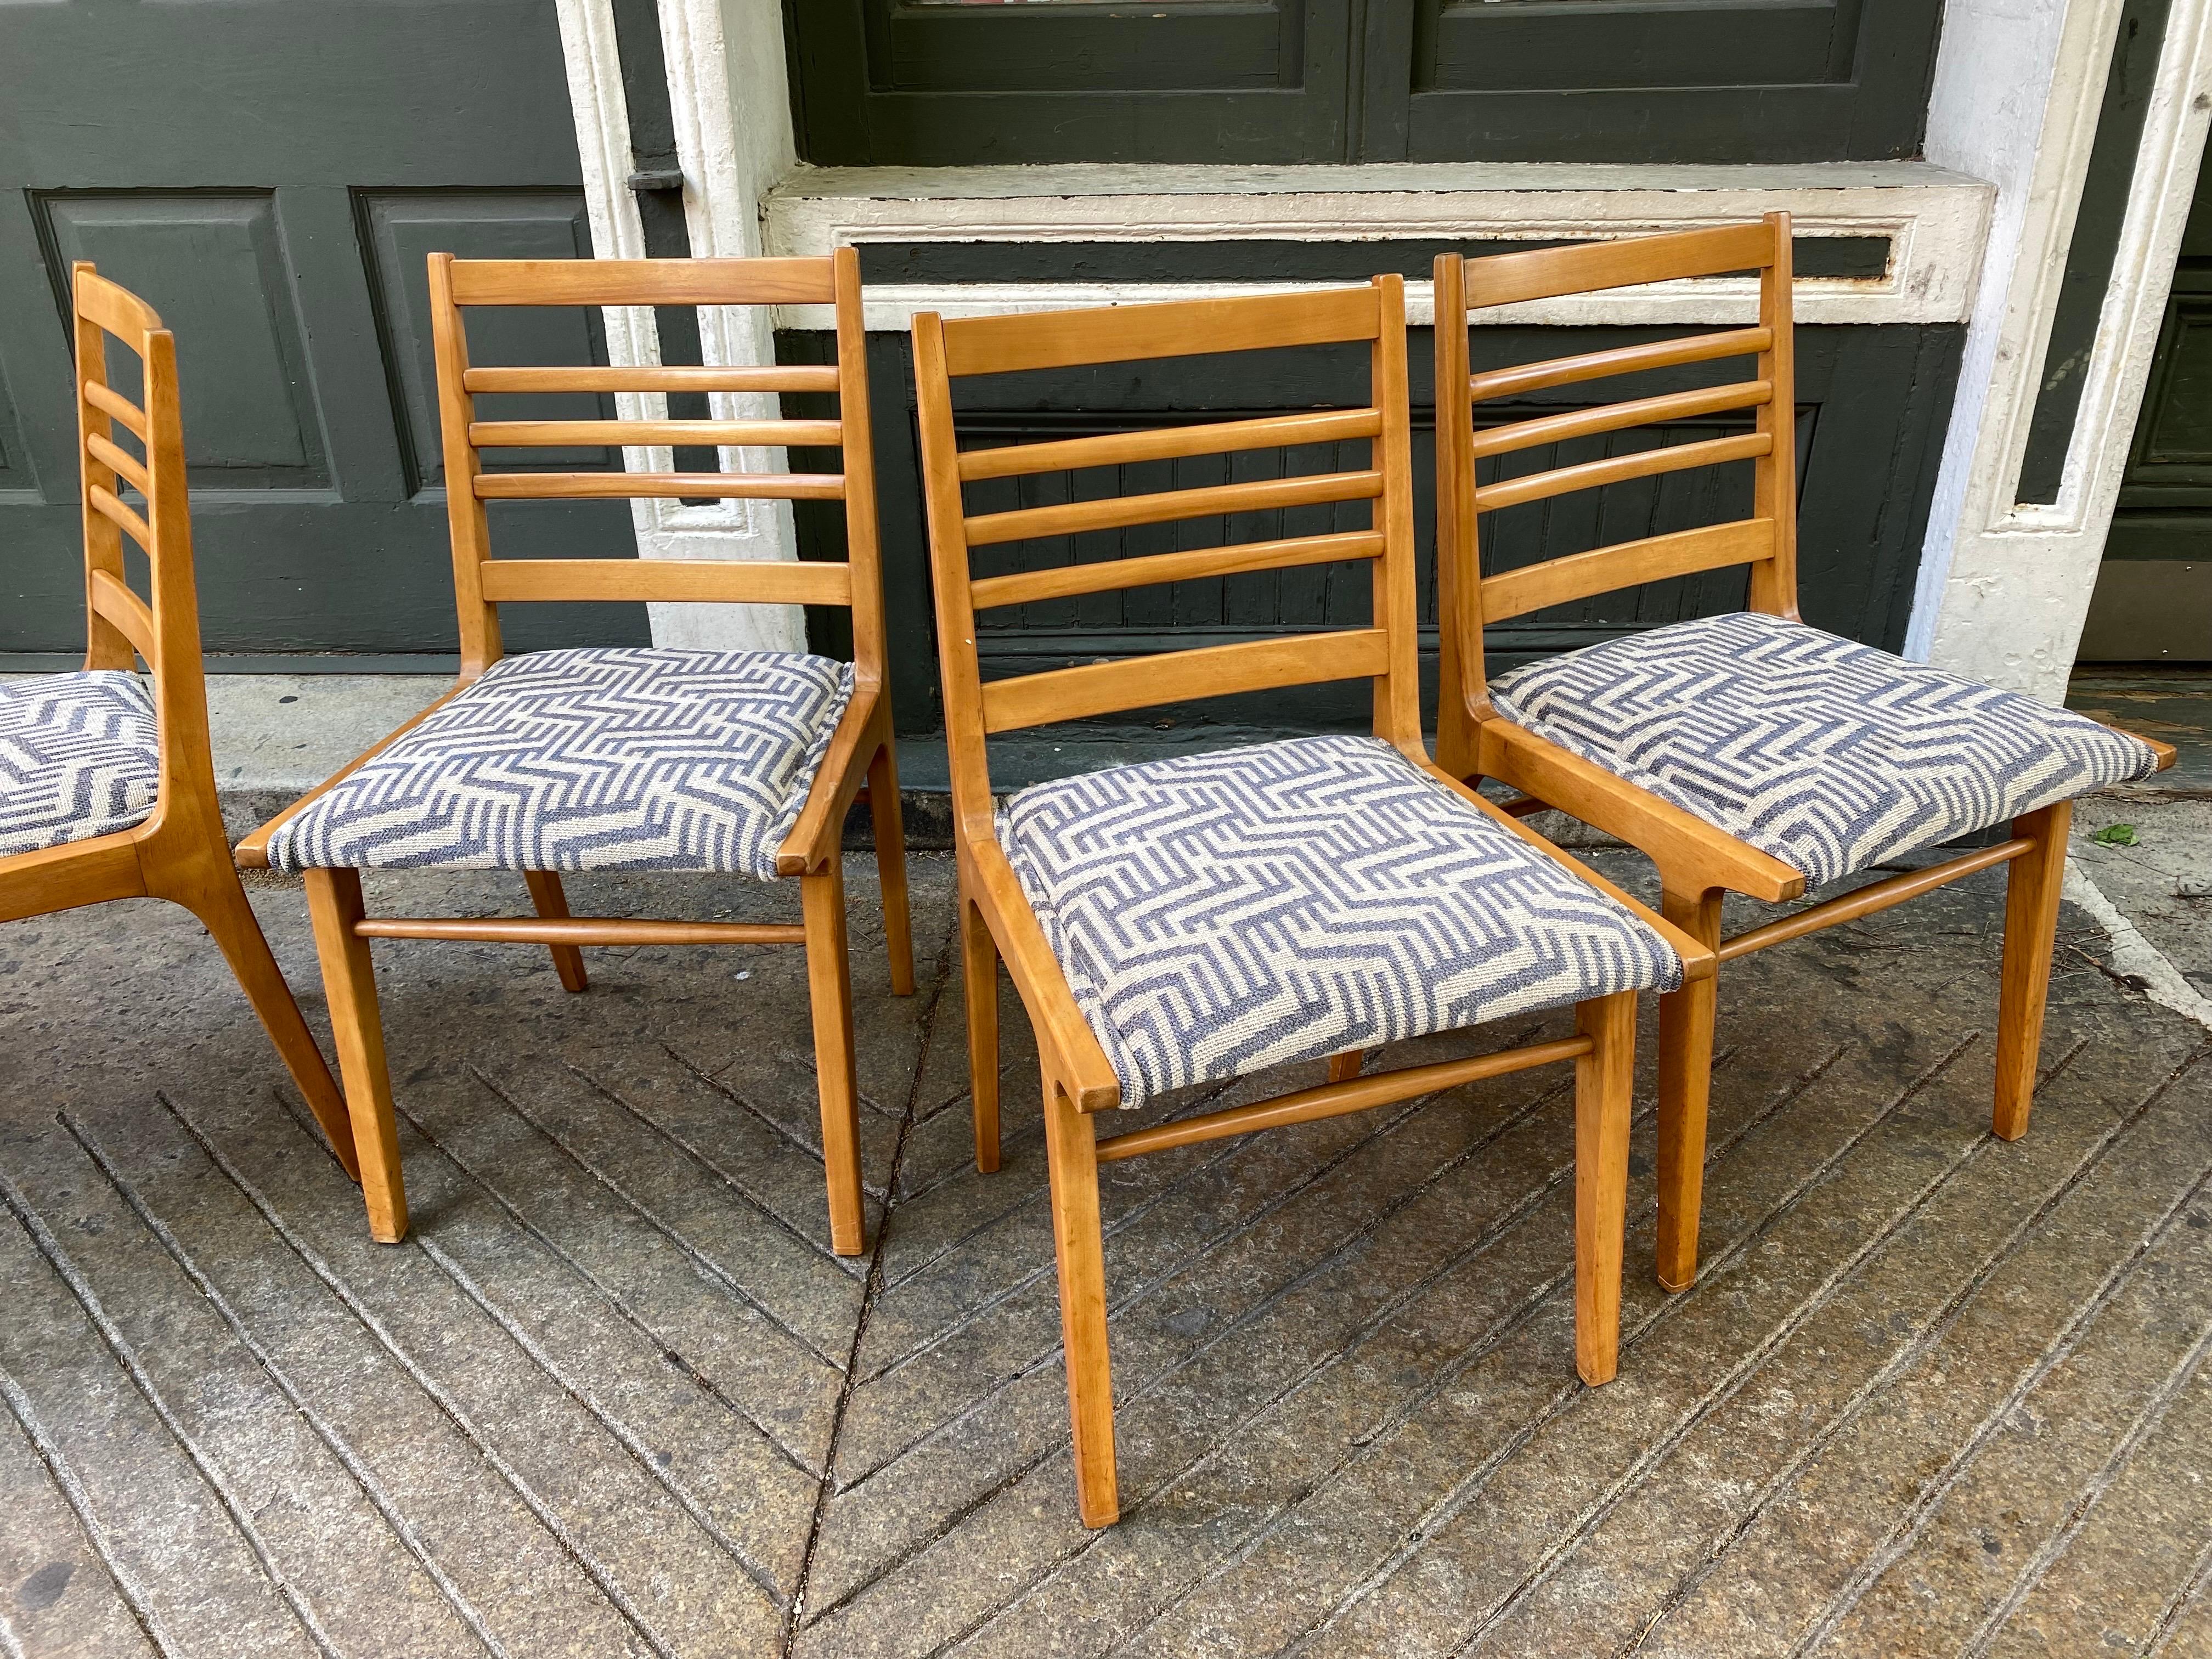 Set of 6 Maple dining chairs with newly re-upholstered seats. Fabric is a cream and blue-gray pattern, looks a little like a maze or Greek Key. Very nice scale! Chairs are 18